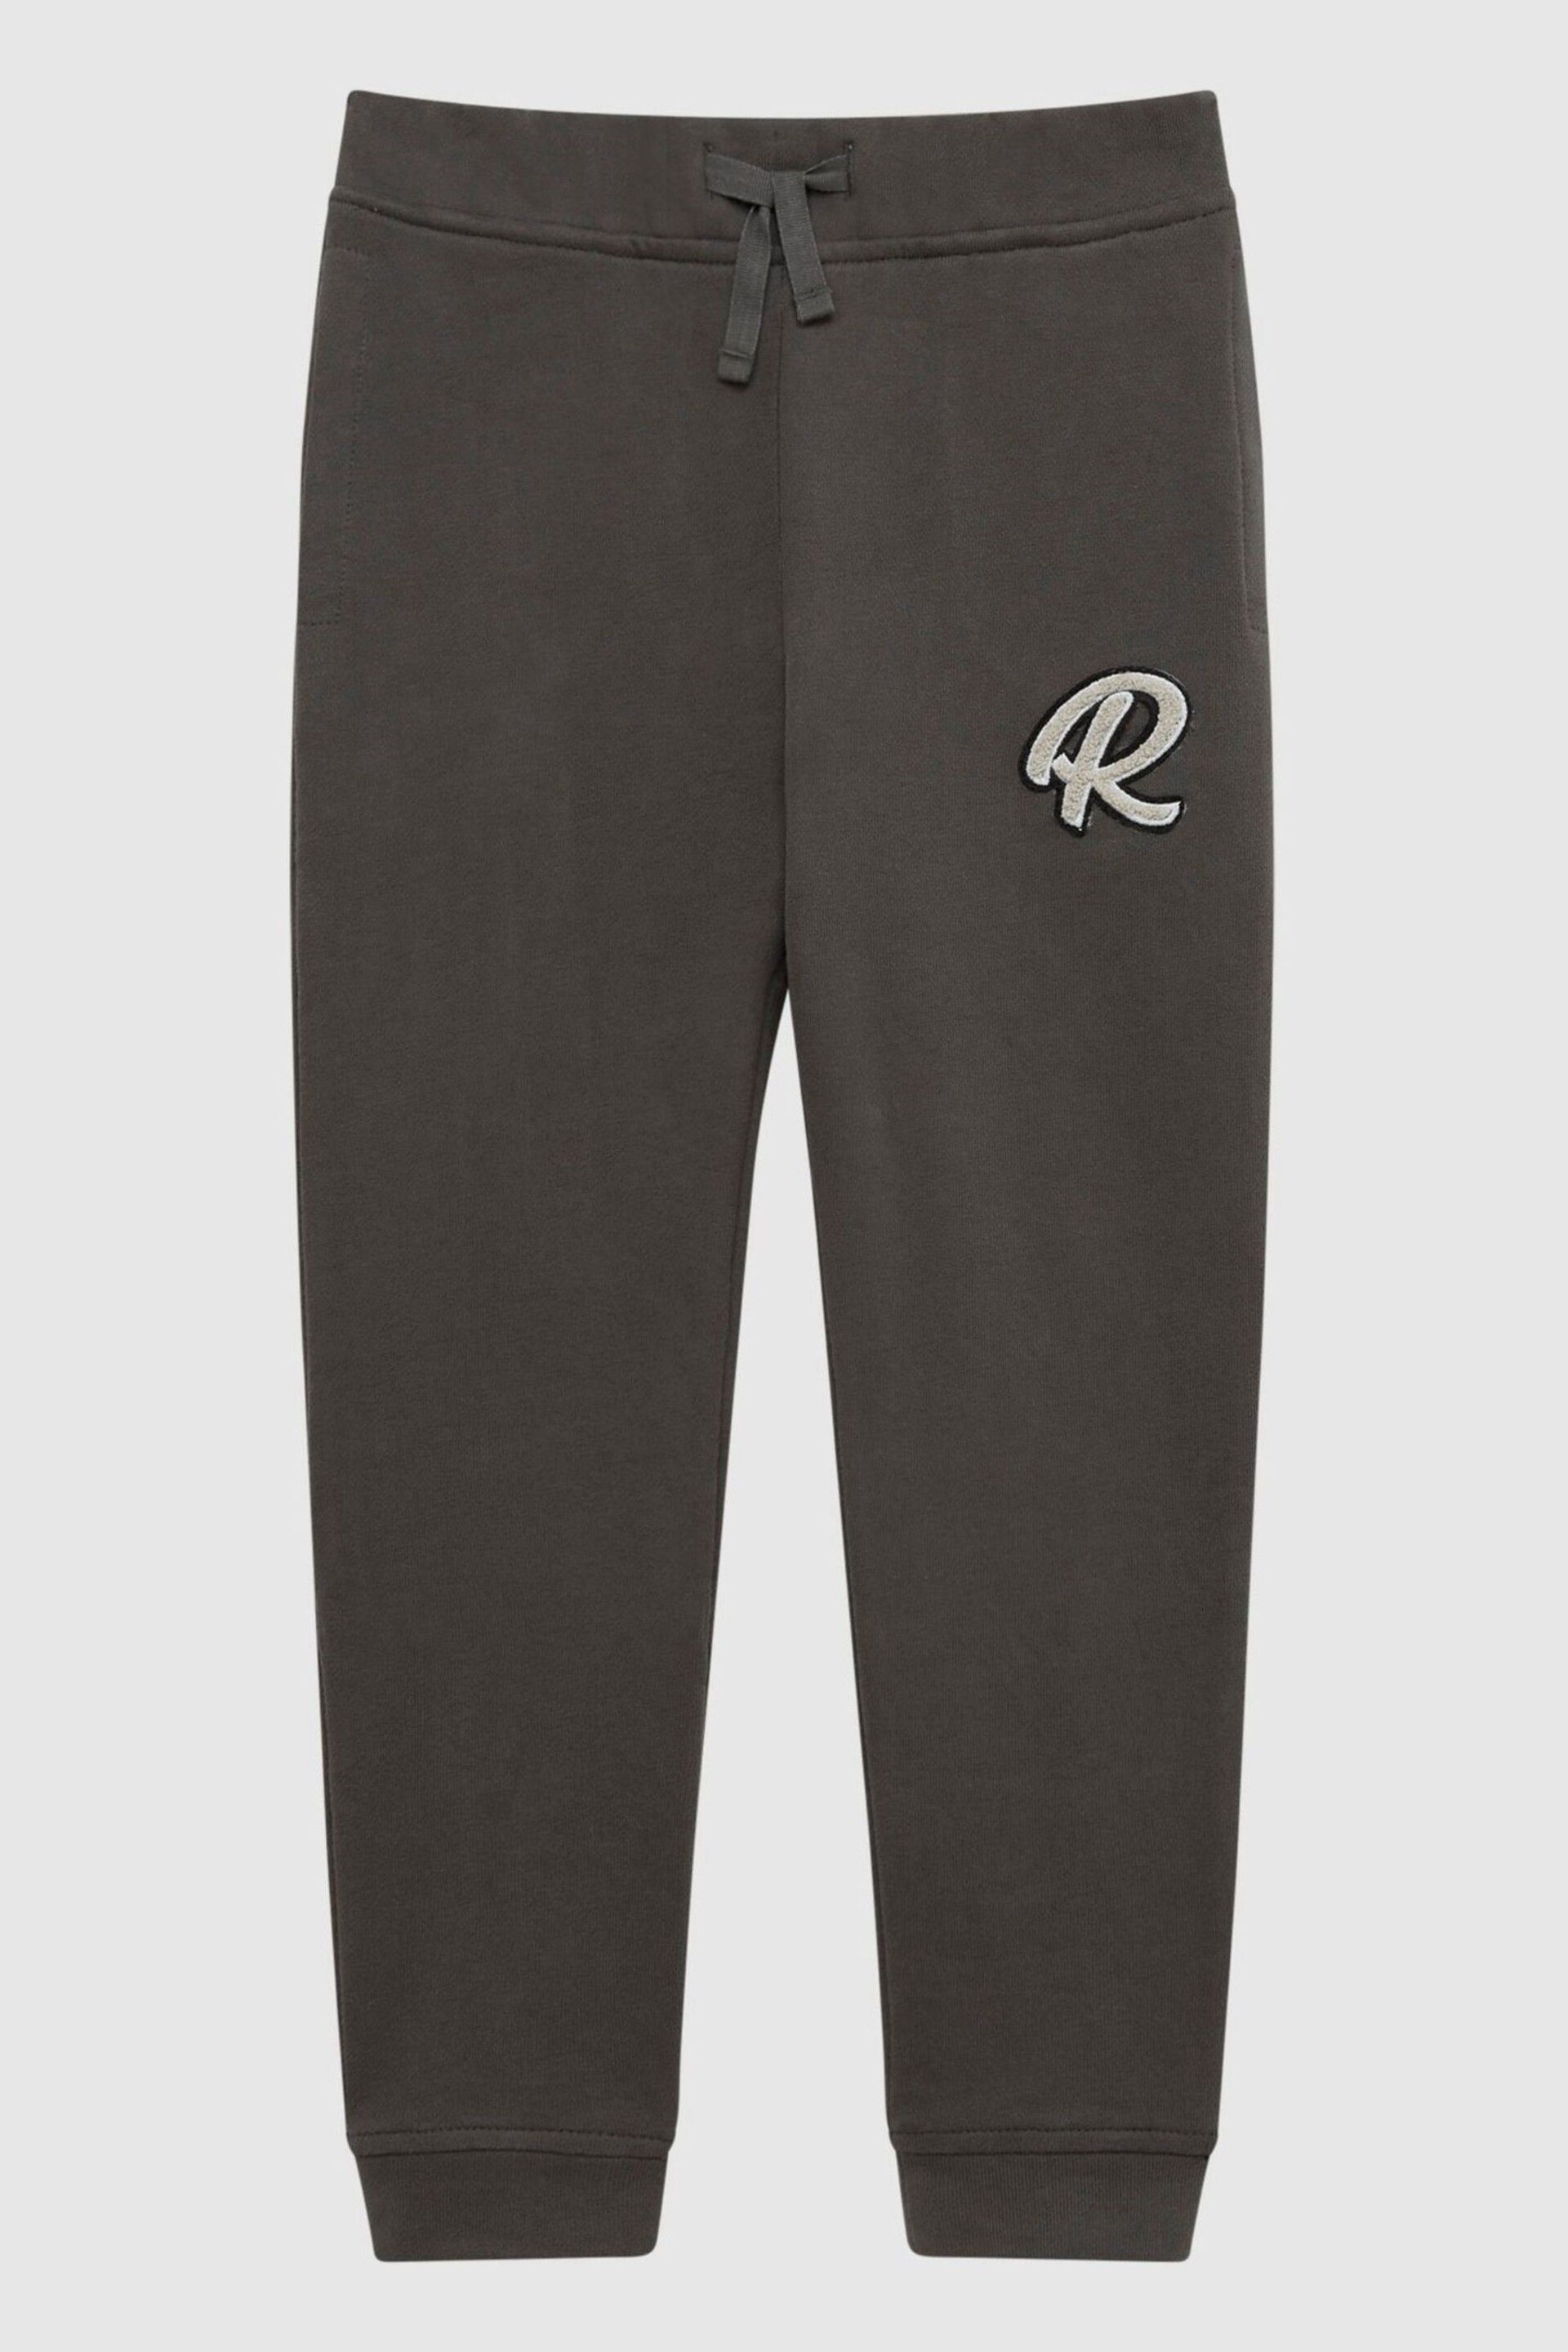 Reiss Olive Toby Garment Dyed Logo Joggers - Image 2 of 6